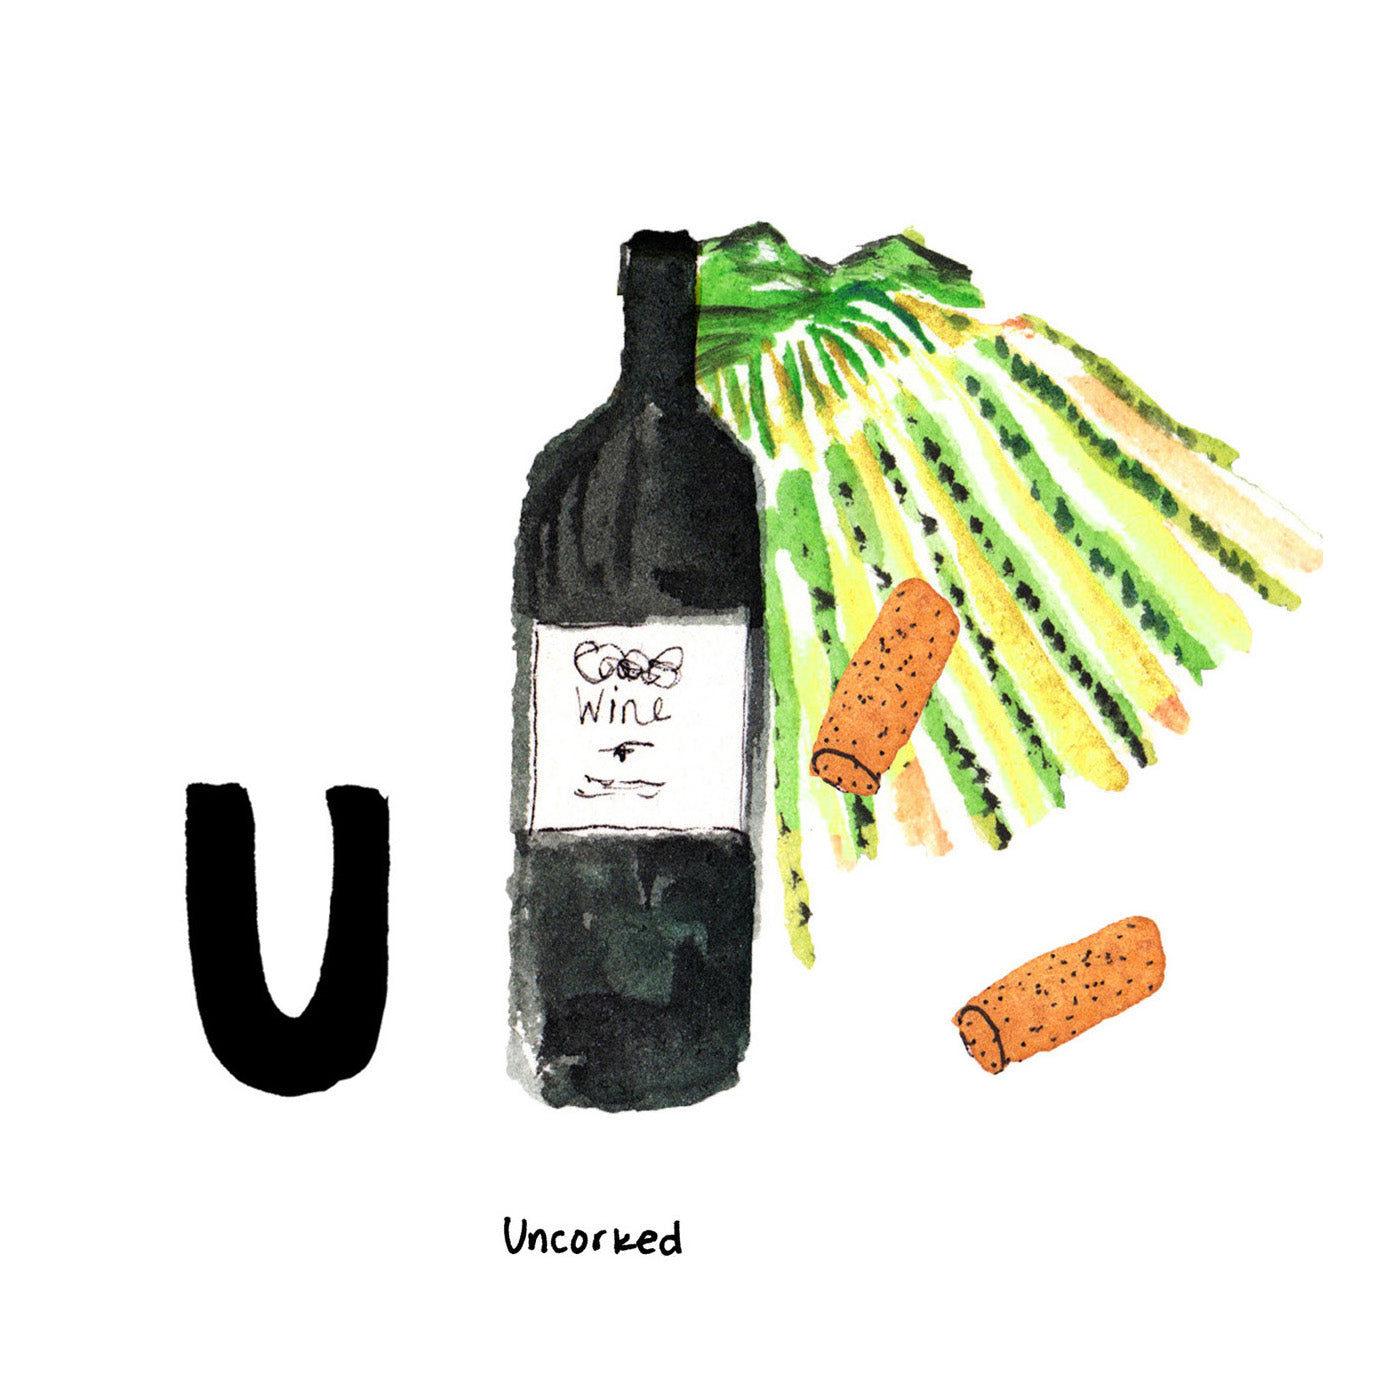 U is for Uncorked. California is the largest grape and wine producing state in the United States, and is responsible for producing over 99% of the commercially grown grapes in the country.